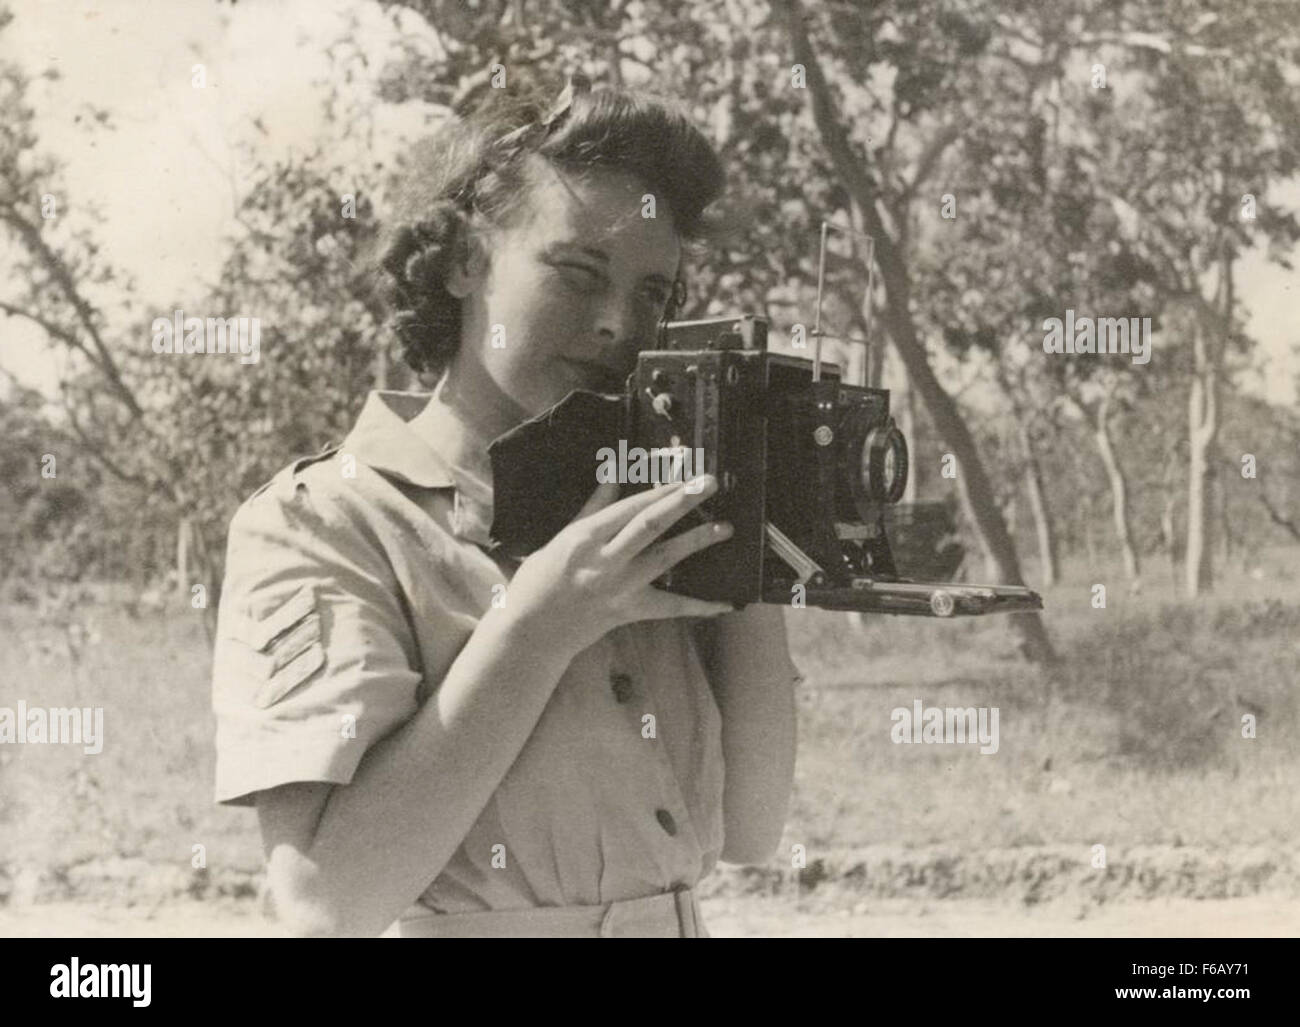 ID number: P10718.004 Photographer: unknown Place: Queensland  Sergeant Olive Lucas, seen here using a 4x5 Speed Graphic camera, re-trained as a photographer in the Australian Chemical Warfare Research and Experimental Section (later 1st Field Trials Company, RAE) following exposure to mustard gas during a chemical trial. Stock Photo